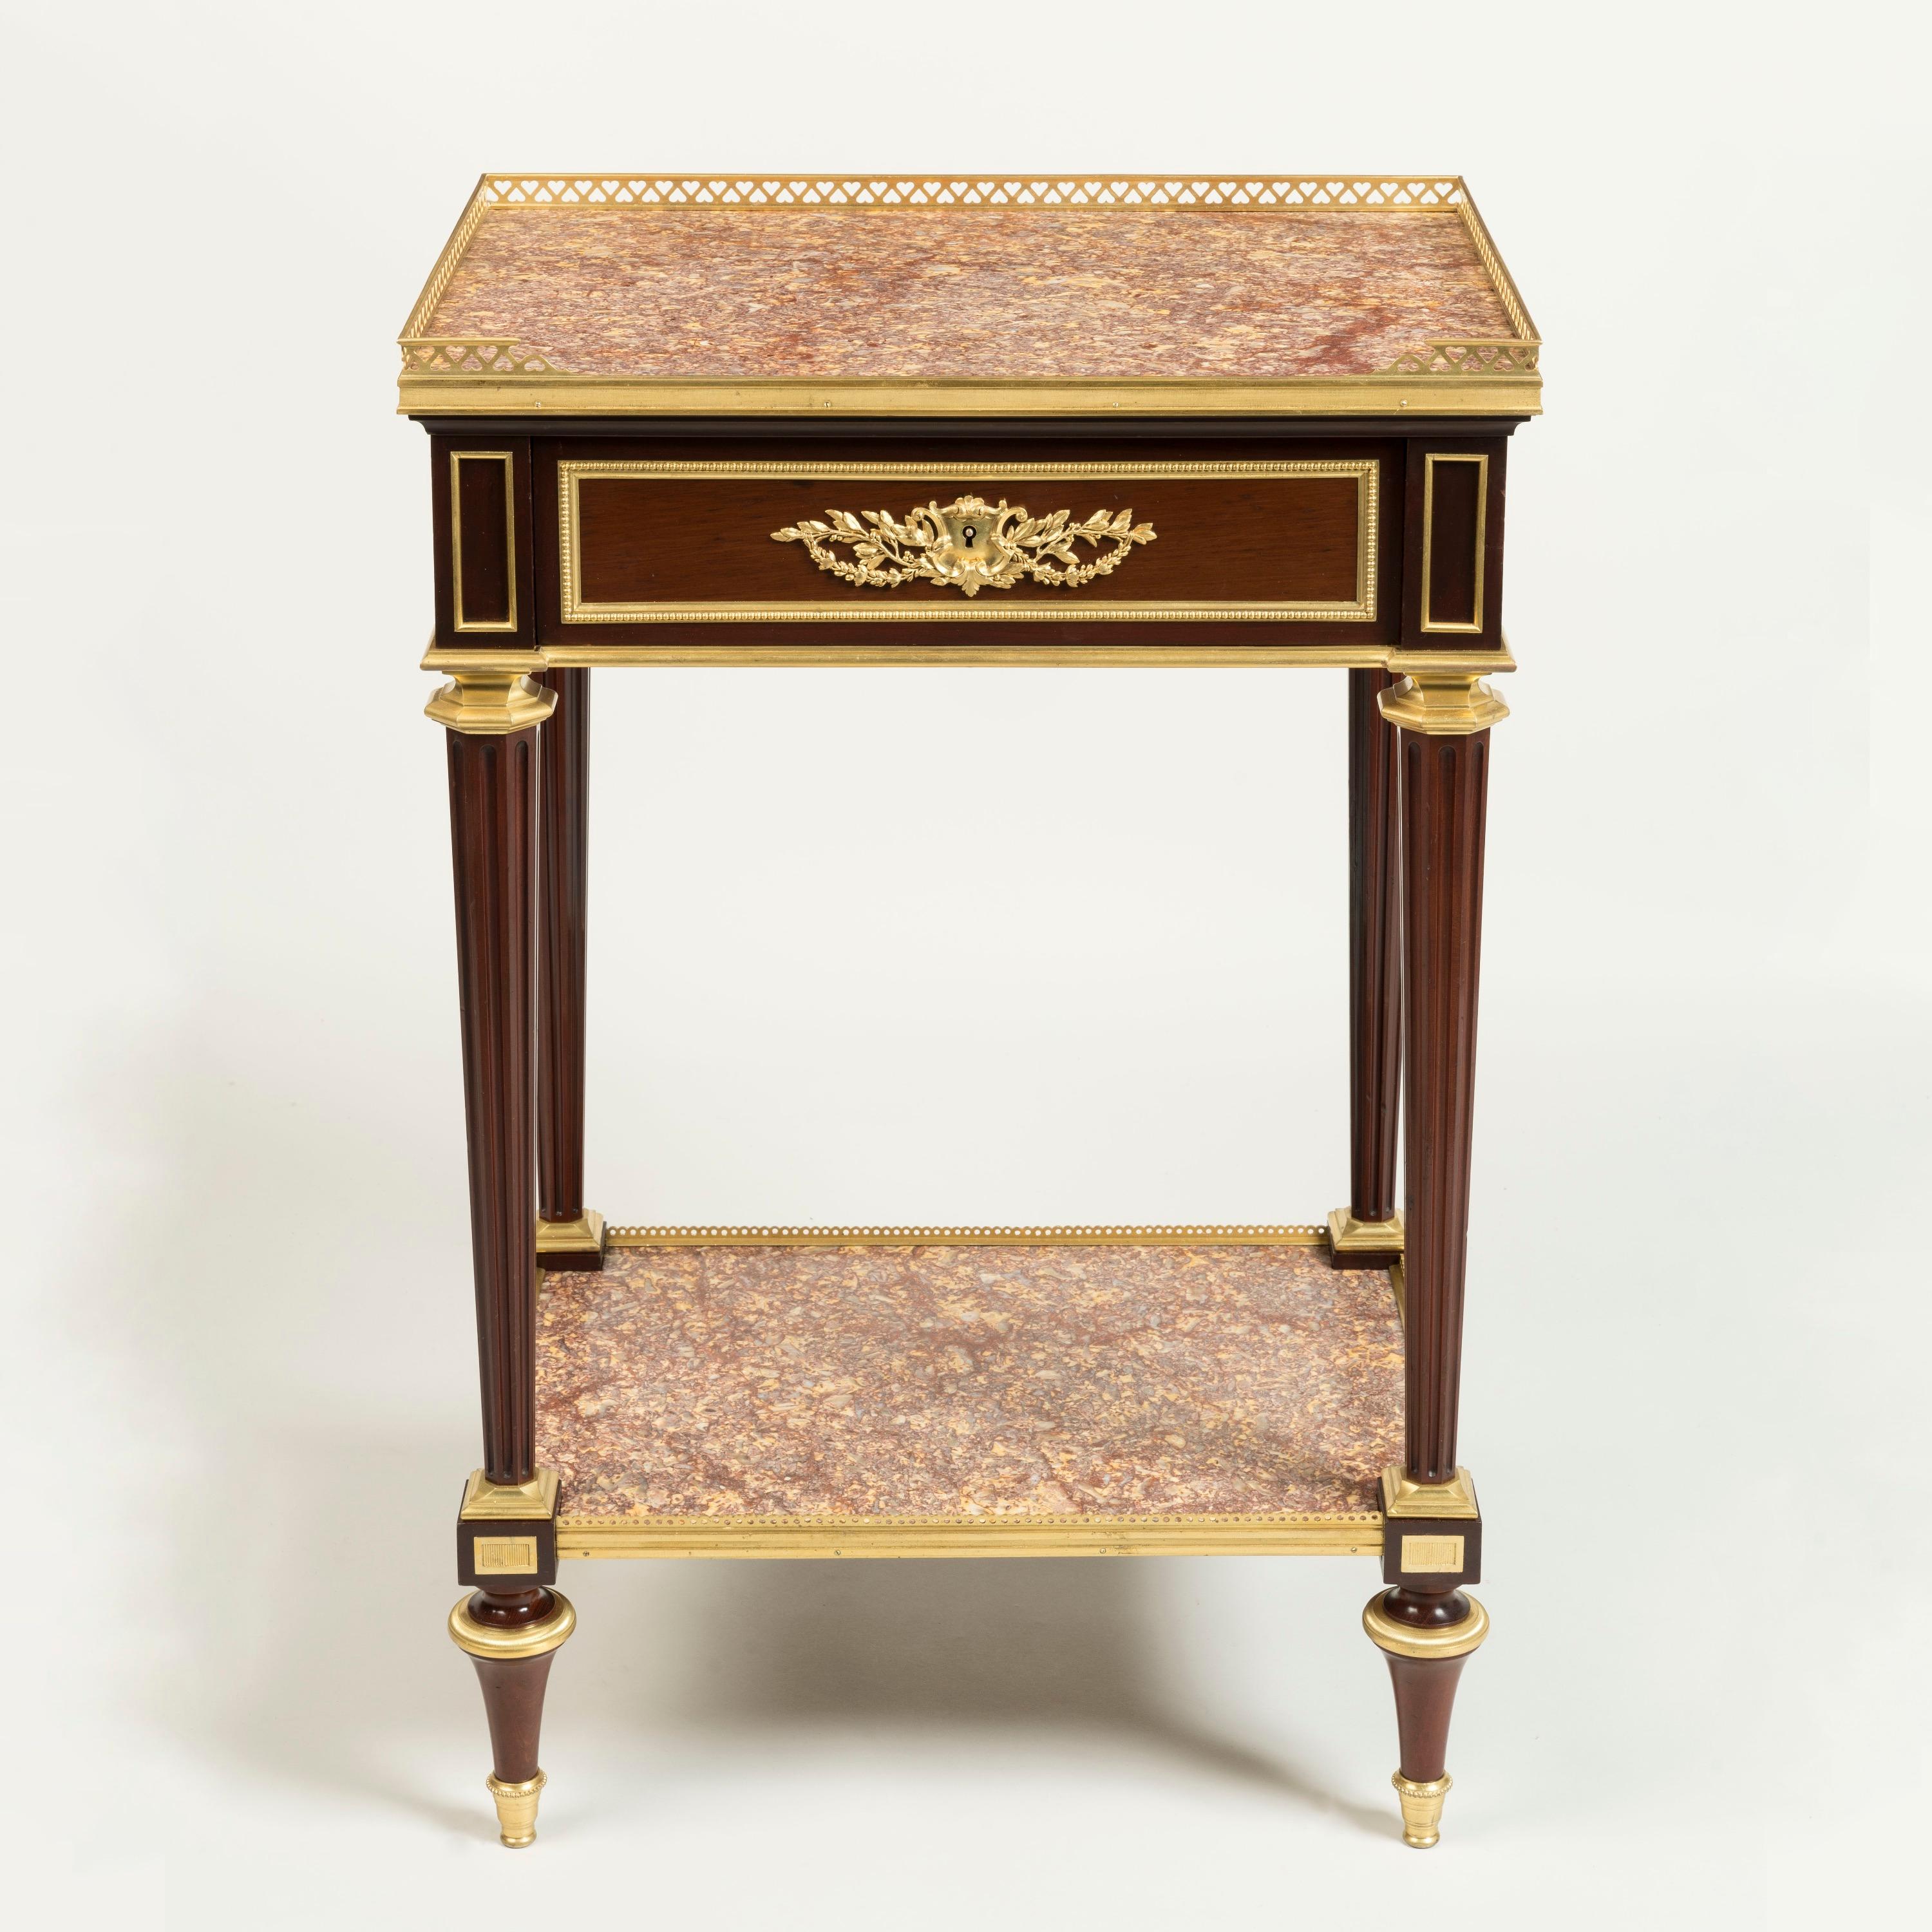 A Fine Occasional Table
By Henry Dasson

Of rectangular form, constructed in mahogany dressed with finely cast and chased gilt bronze mounts; rising from ormolu mounted toupie feet, supporting the lower platform set with a brocatelle d'Espagne